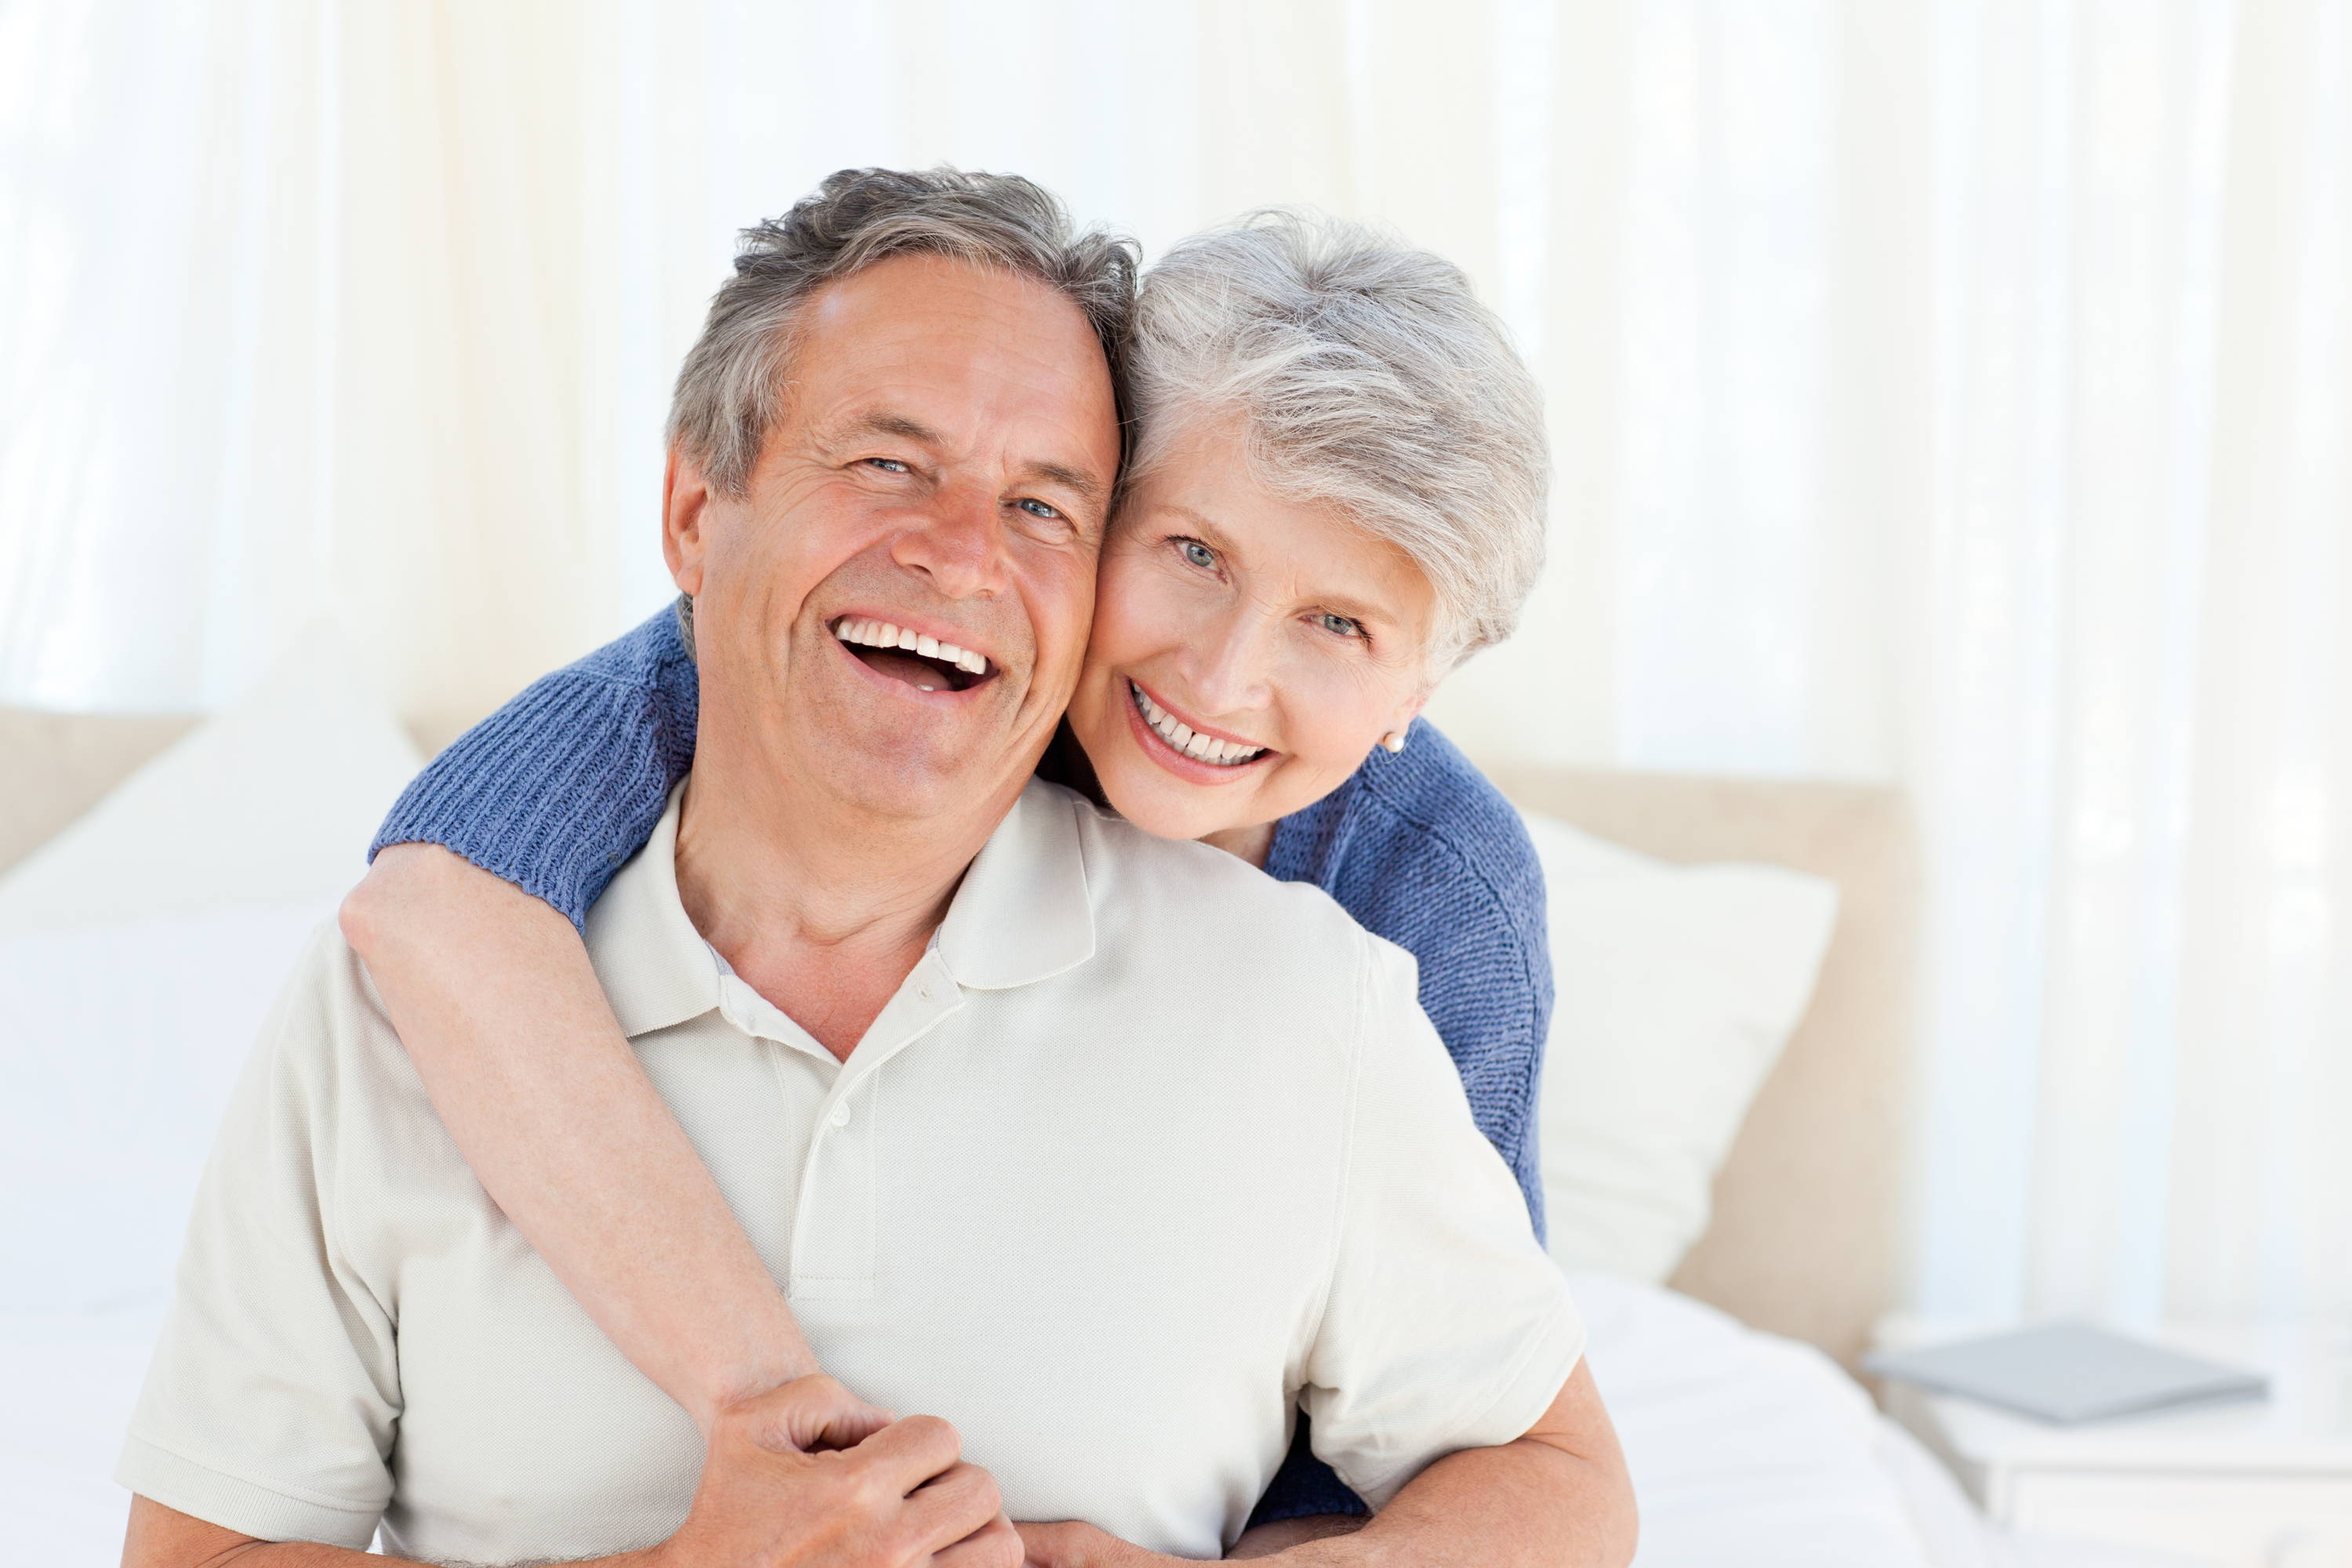 A picture of a happy elderly couple